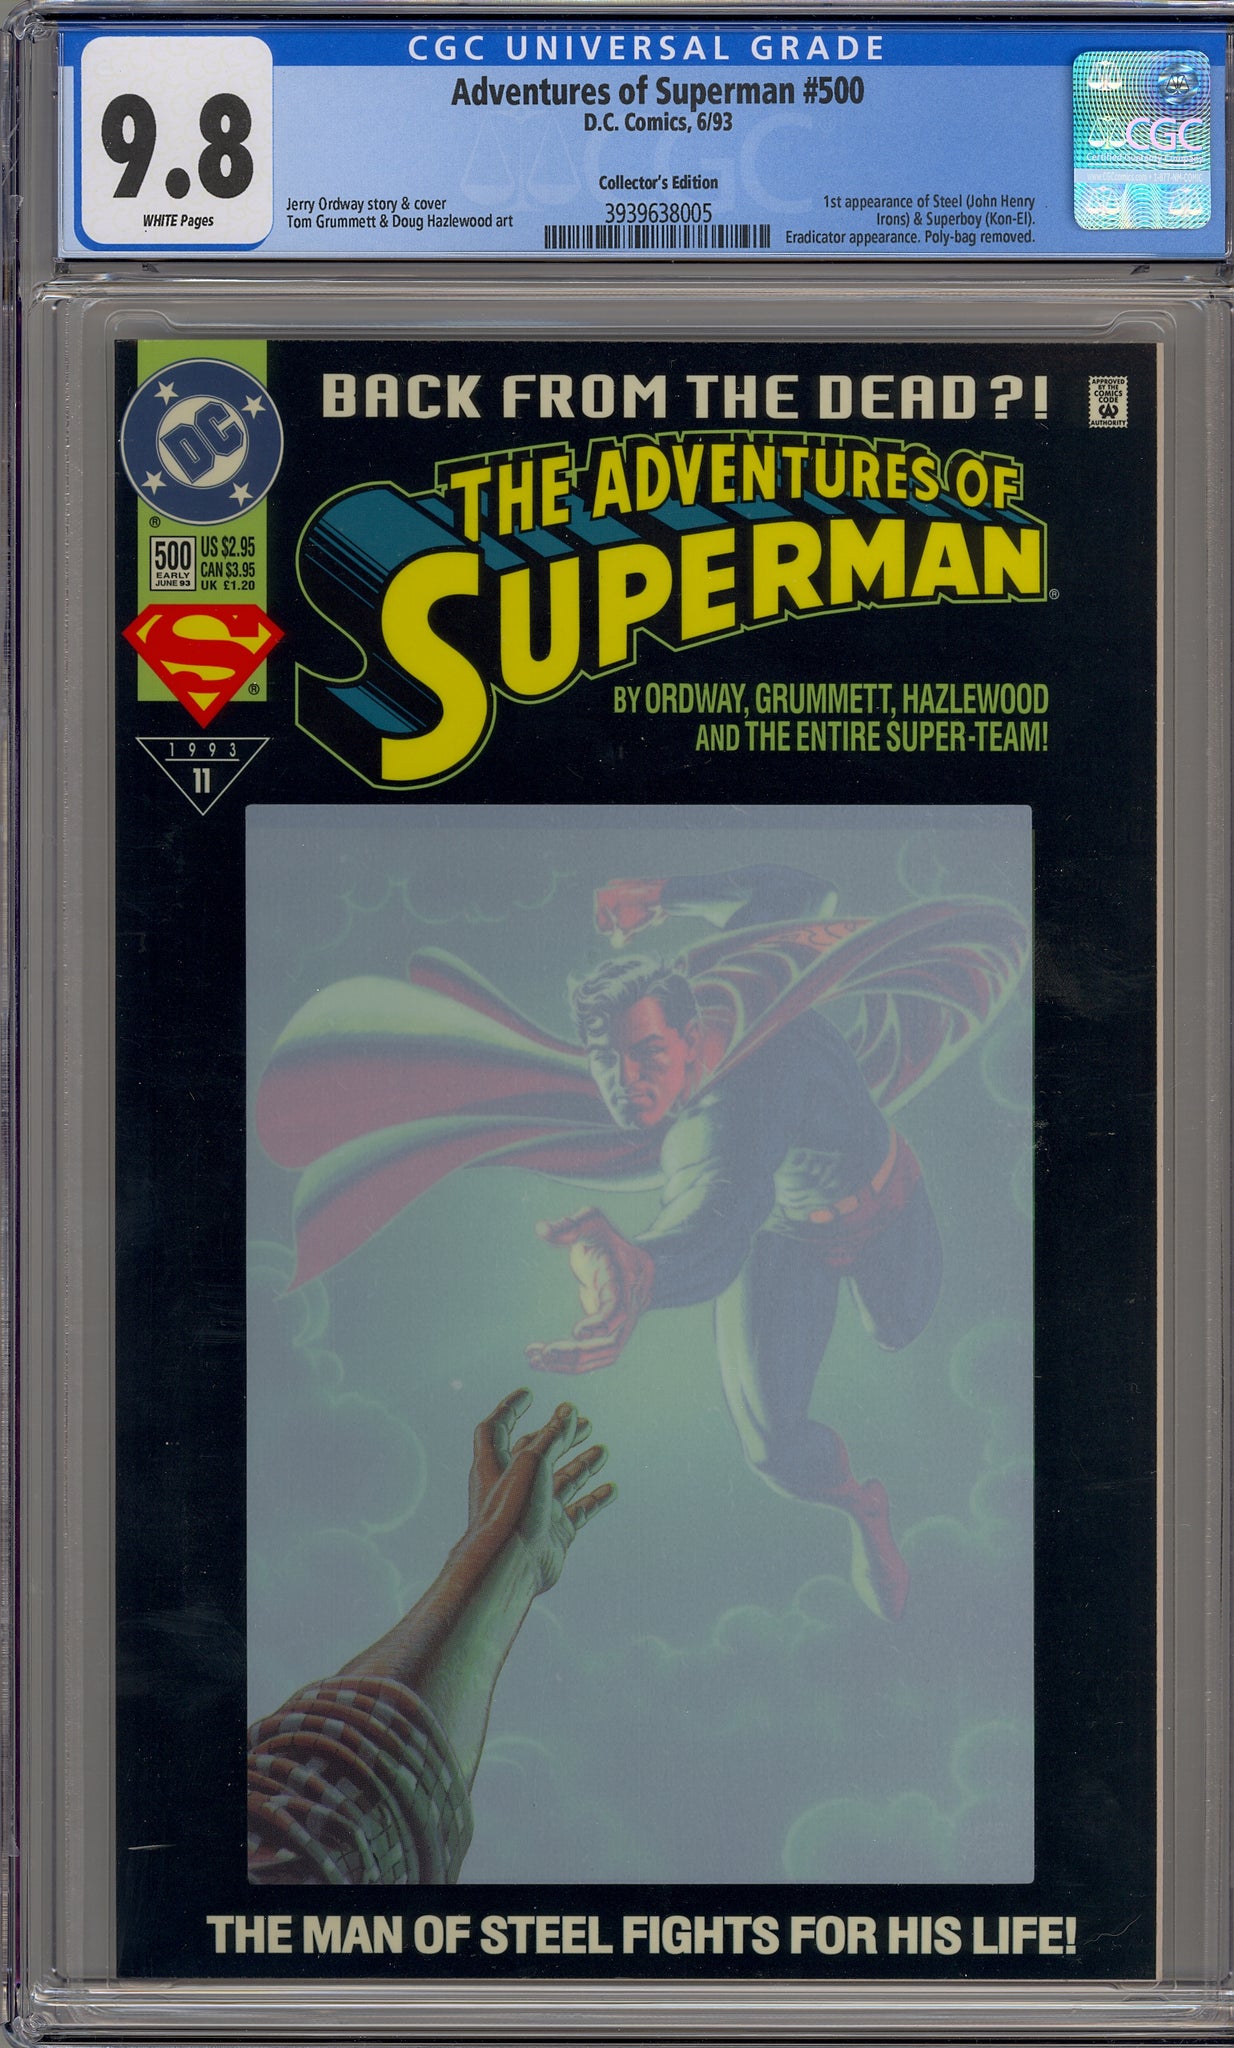 Adventures of Superman #500 collector's edition (1993)